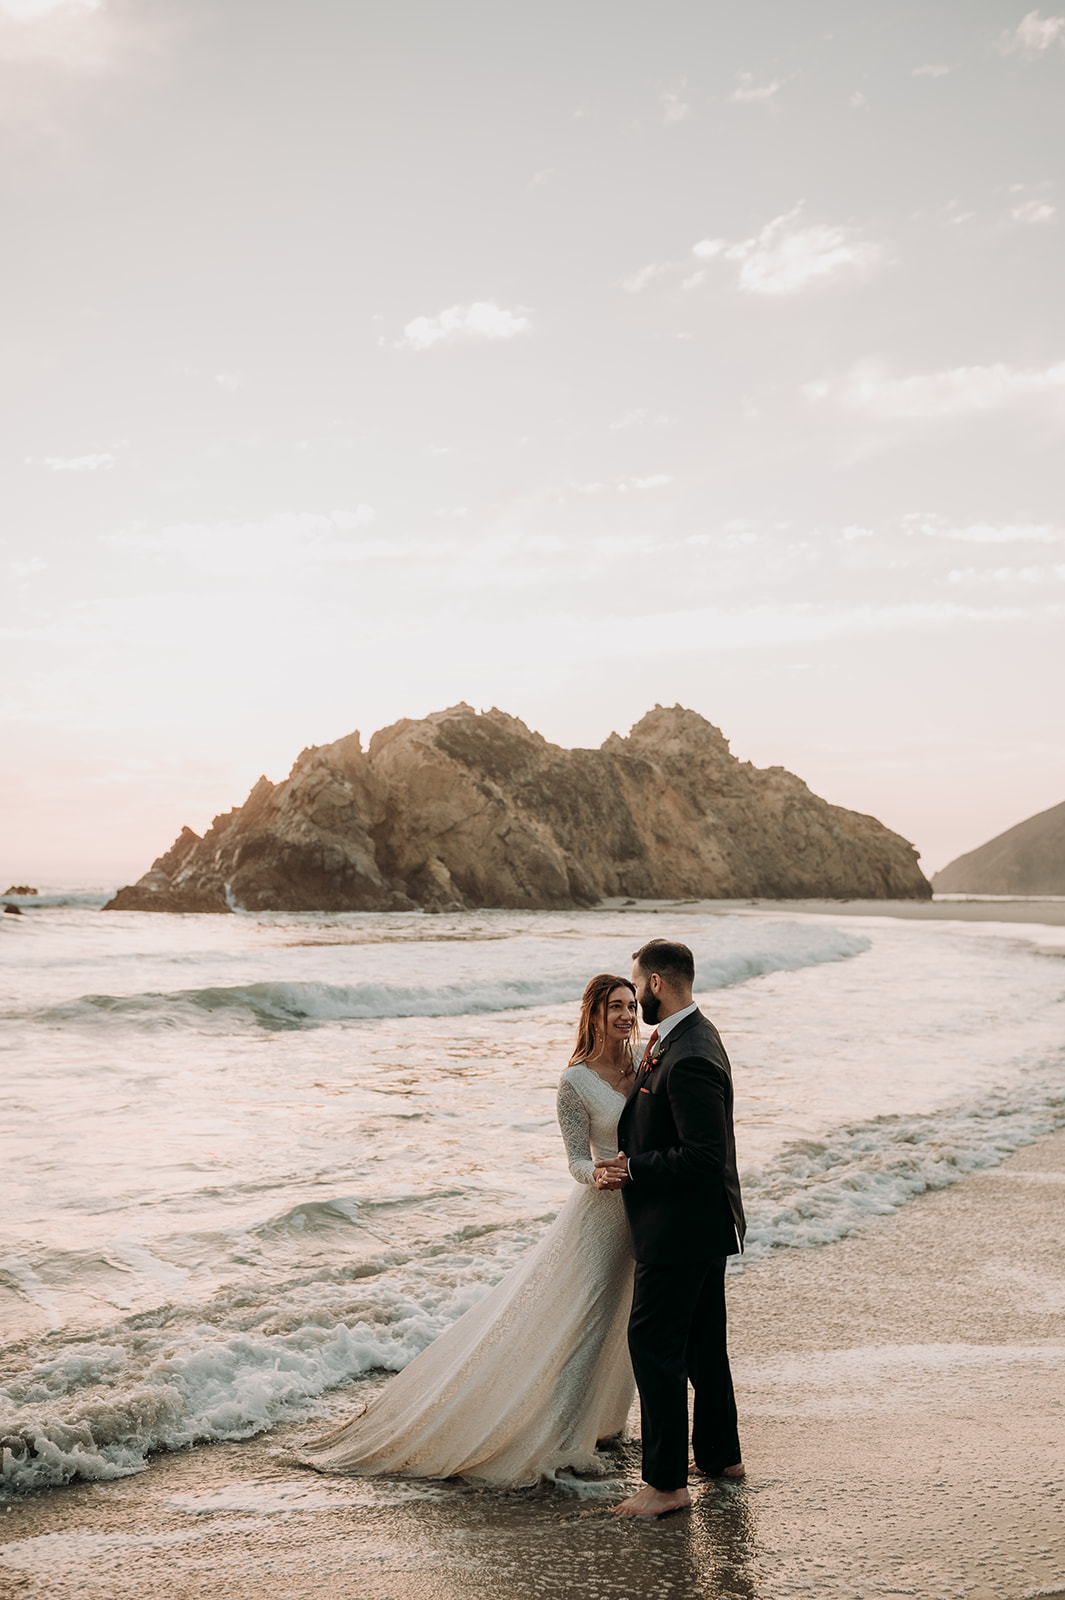 Bride and Groom dancing in the waves in wedding attire as the sunsets in Big Sur, California.